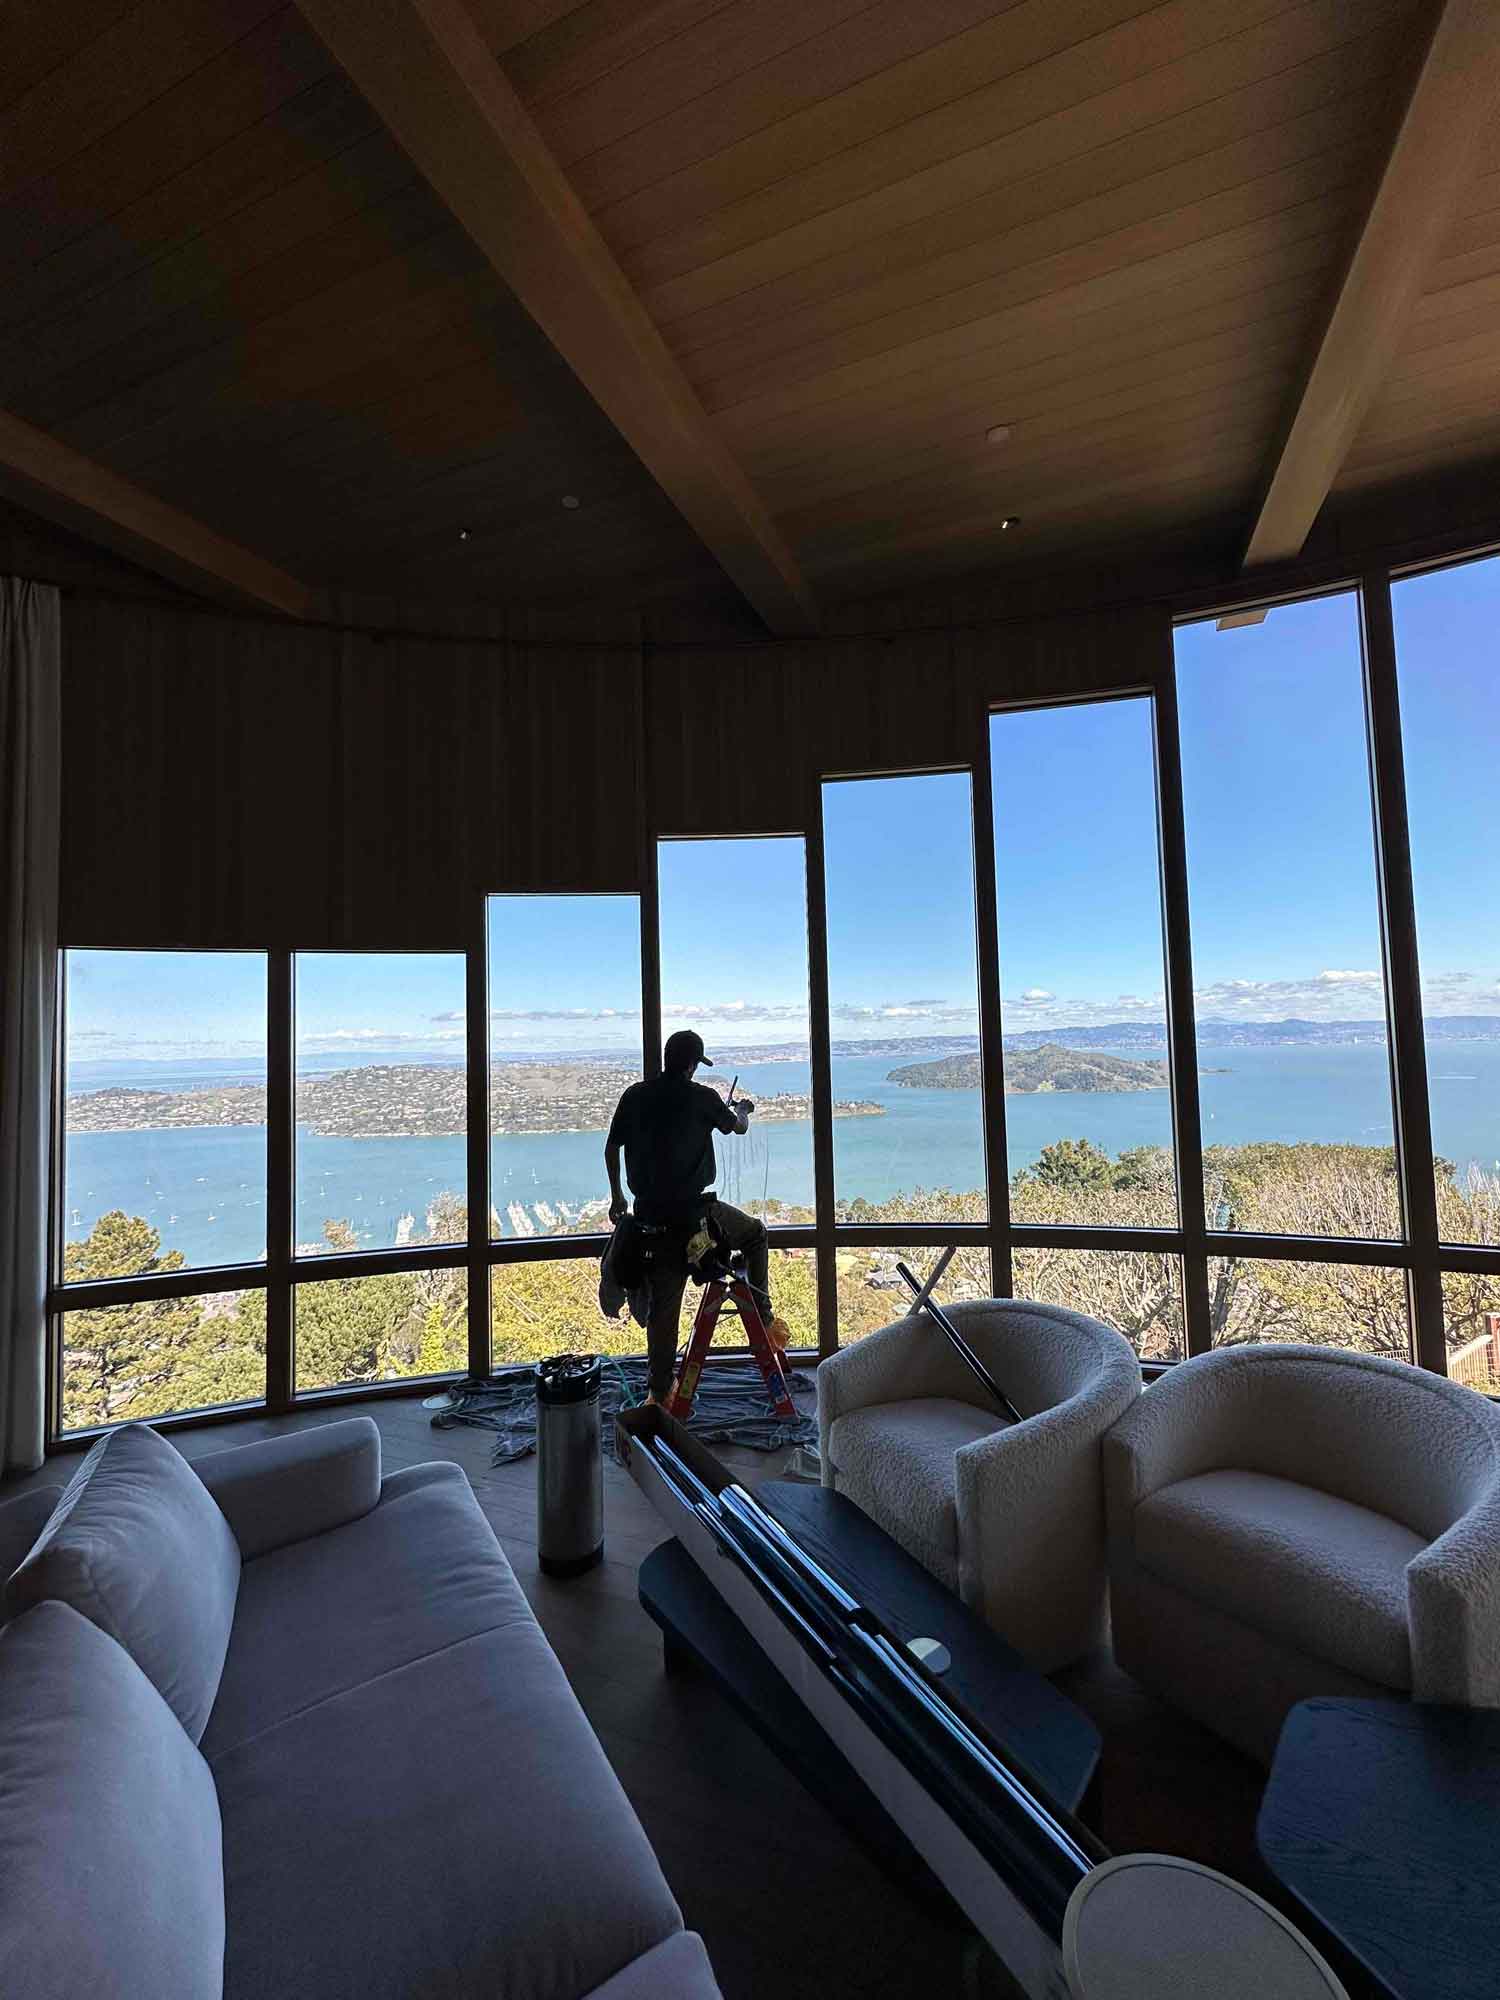 ClimatePro installs 3M Prestige Window Film on the windows of this home in Sausalito, CA. Now available all over the San Francisco Bay Area. Free Estimates.